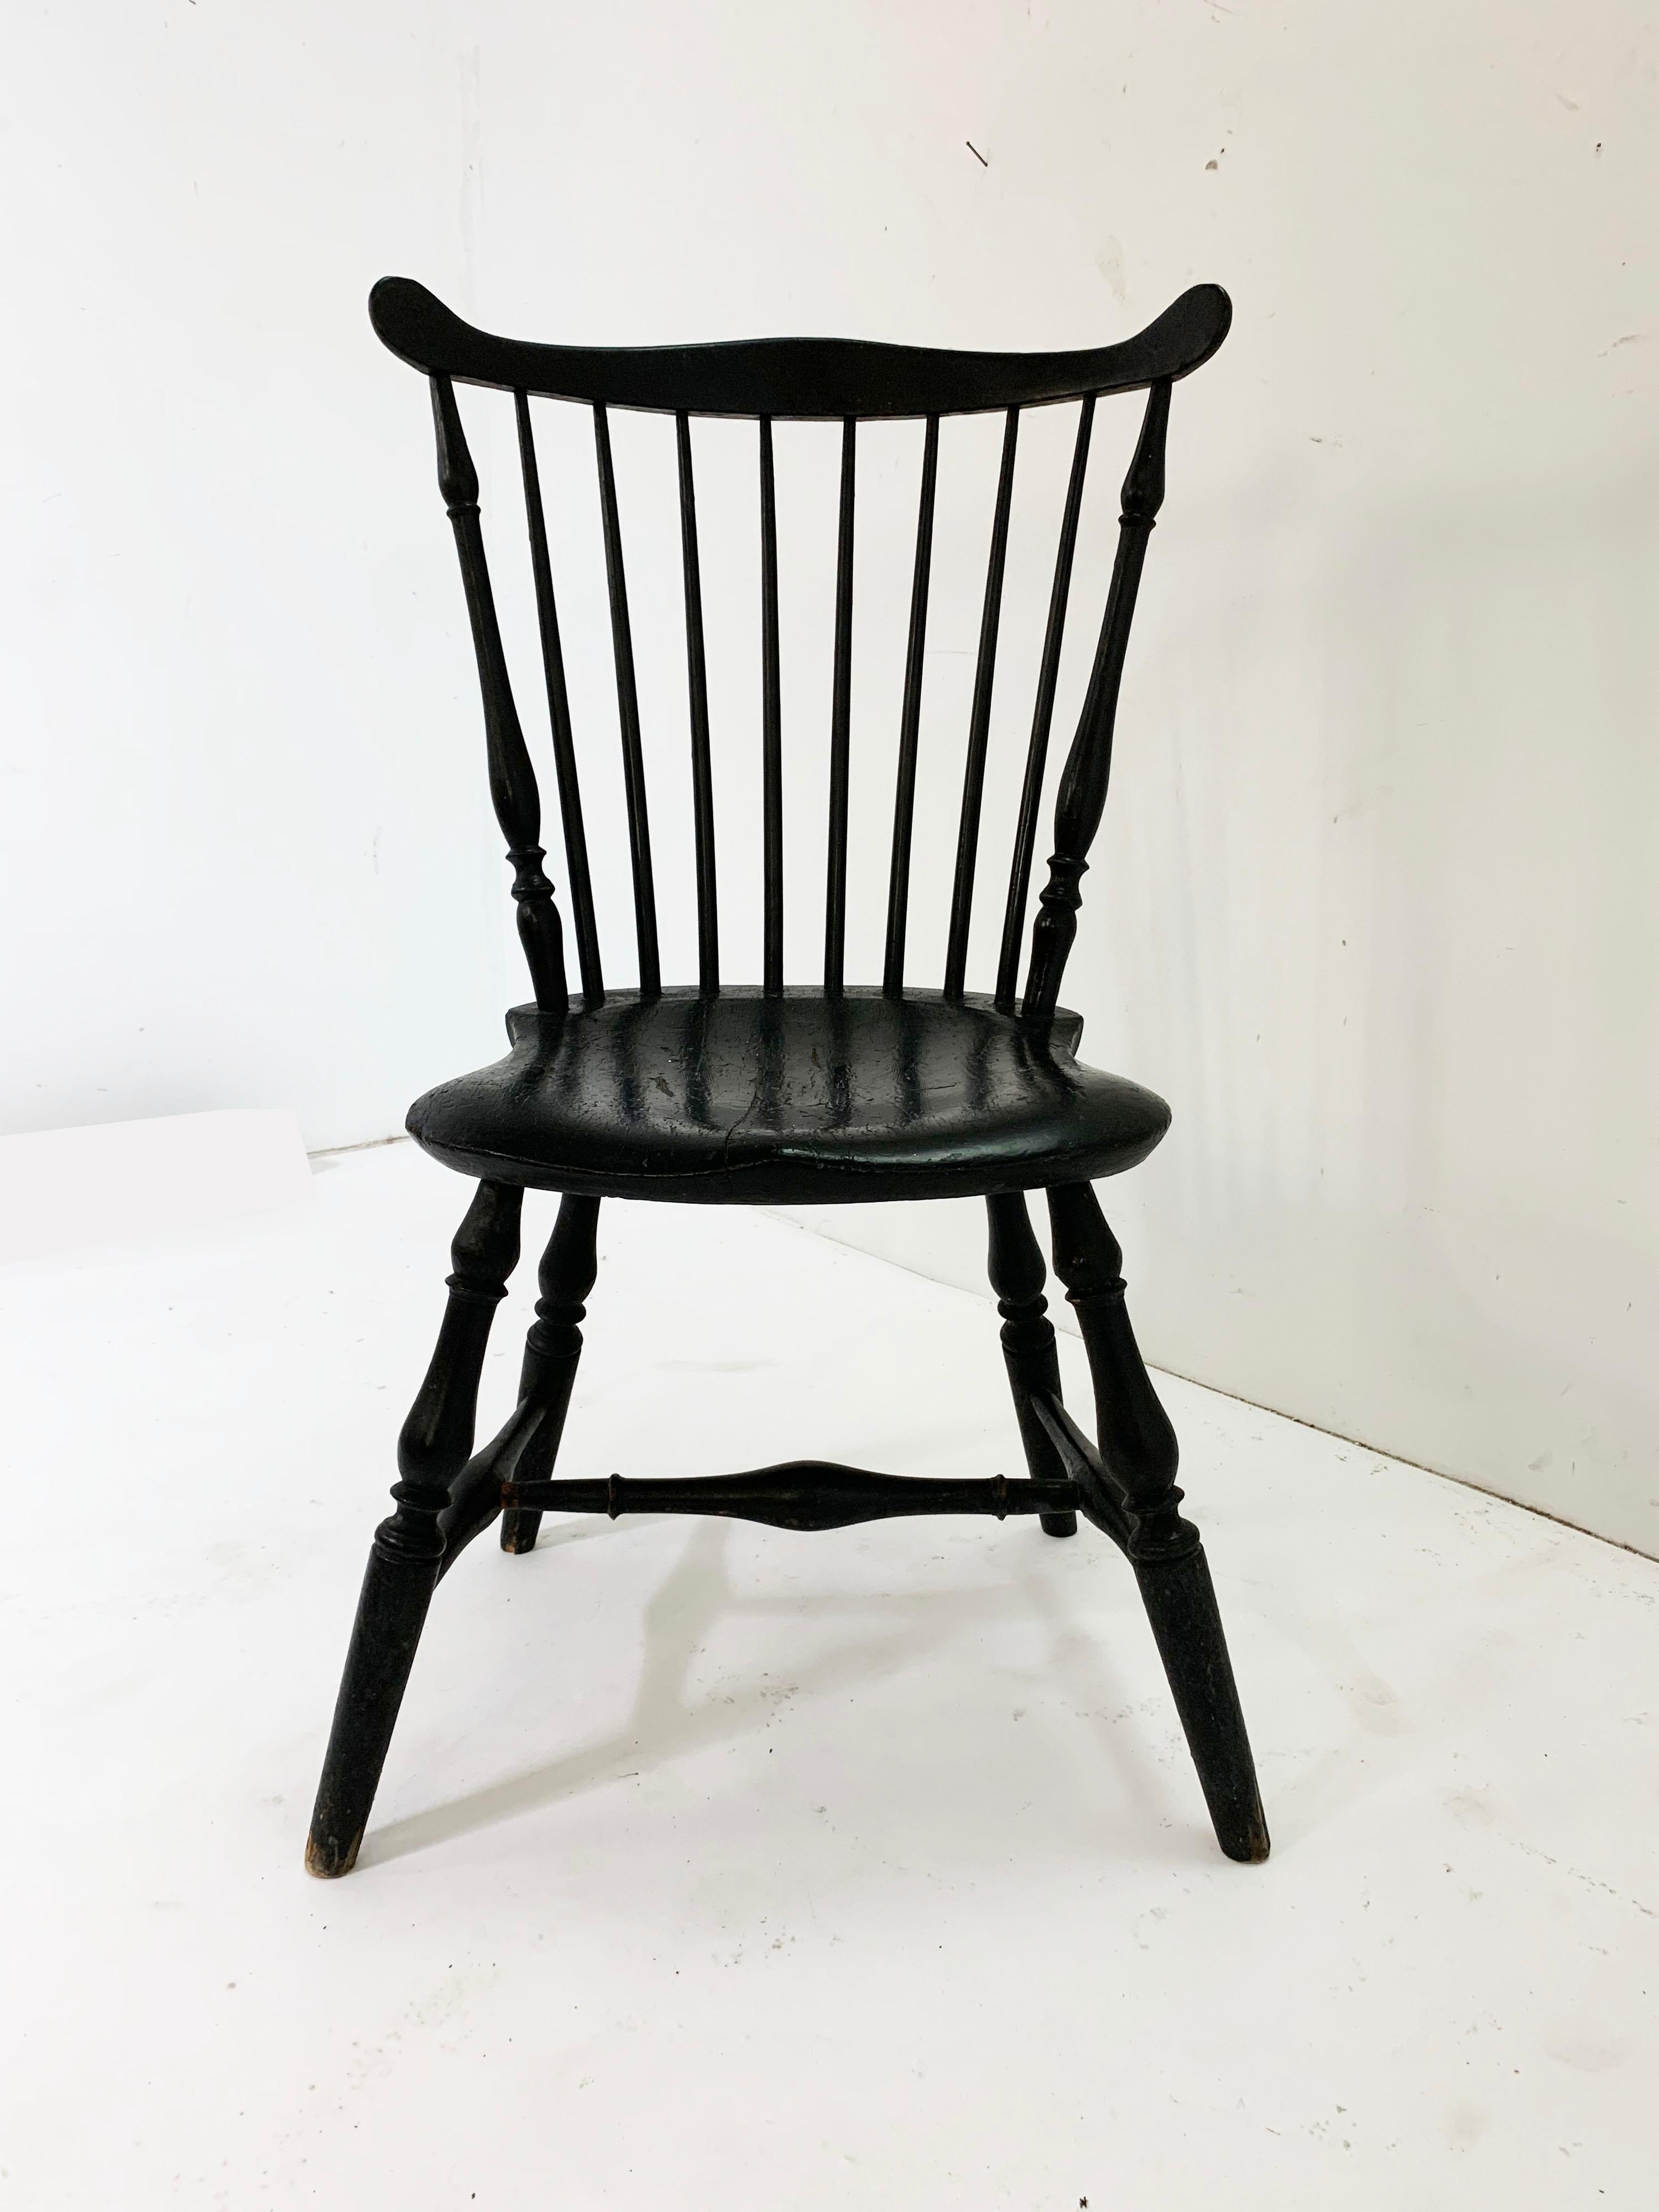 An early 19th comb-back Windsor in original lamp black paint, signed by maker S. Hill, from a Salem, MA collection.